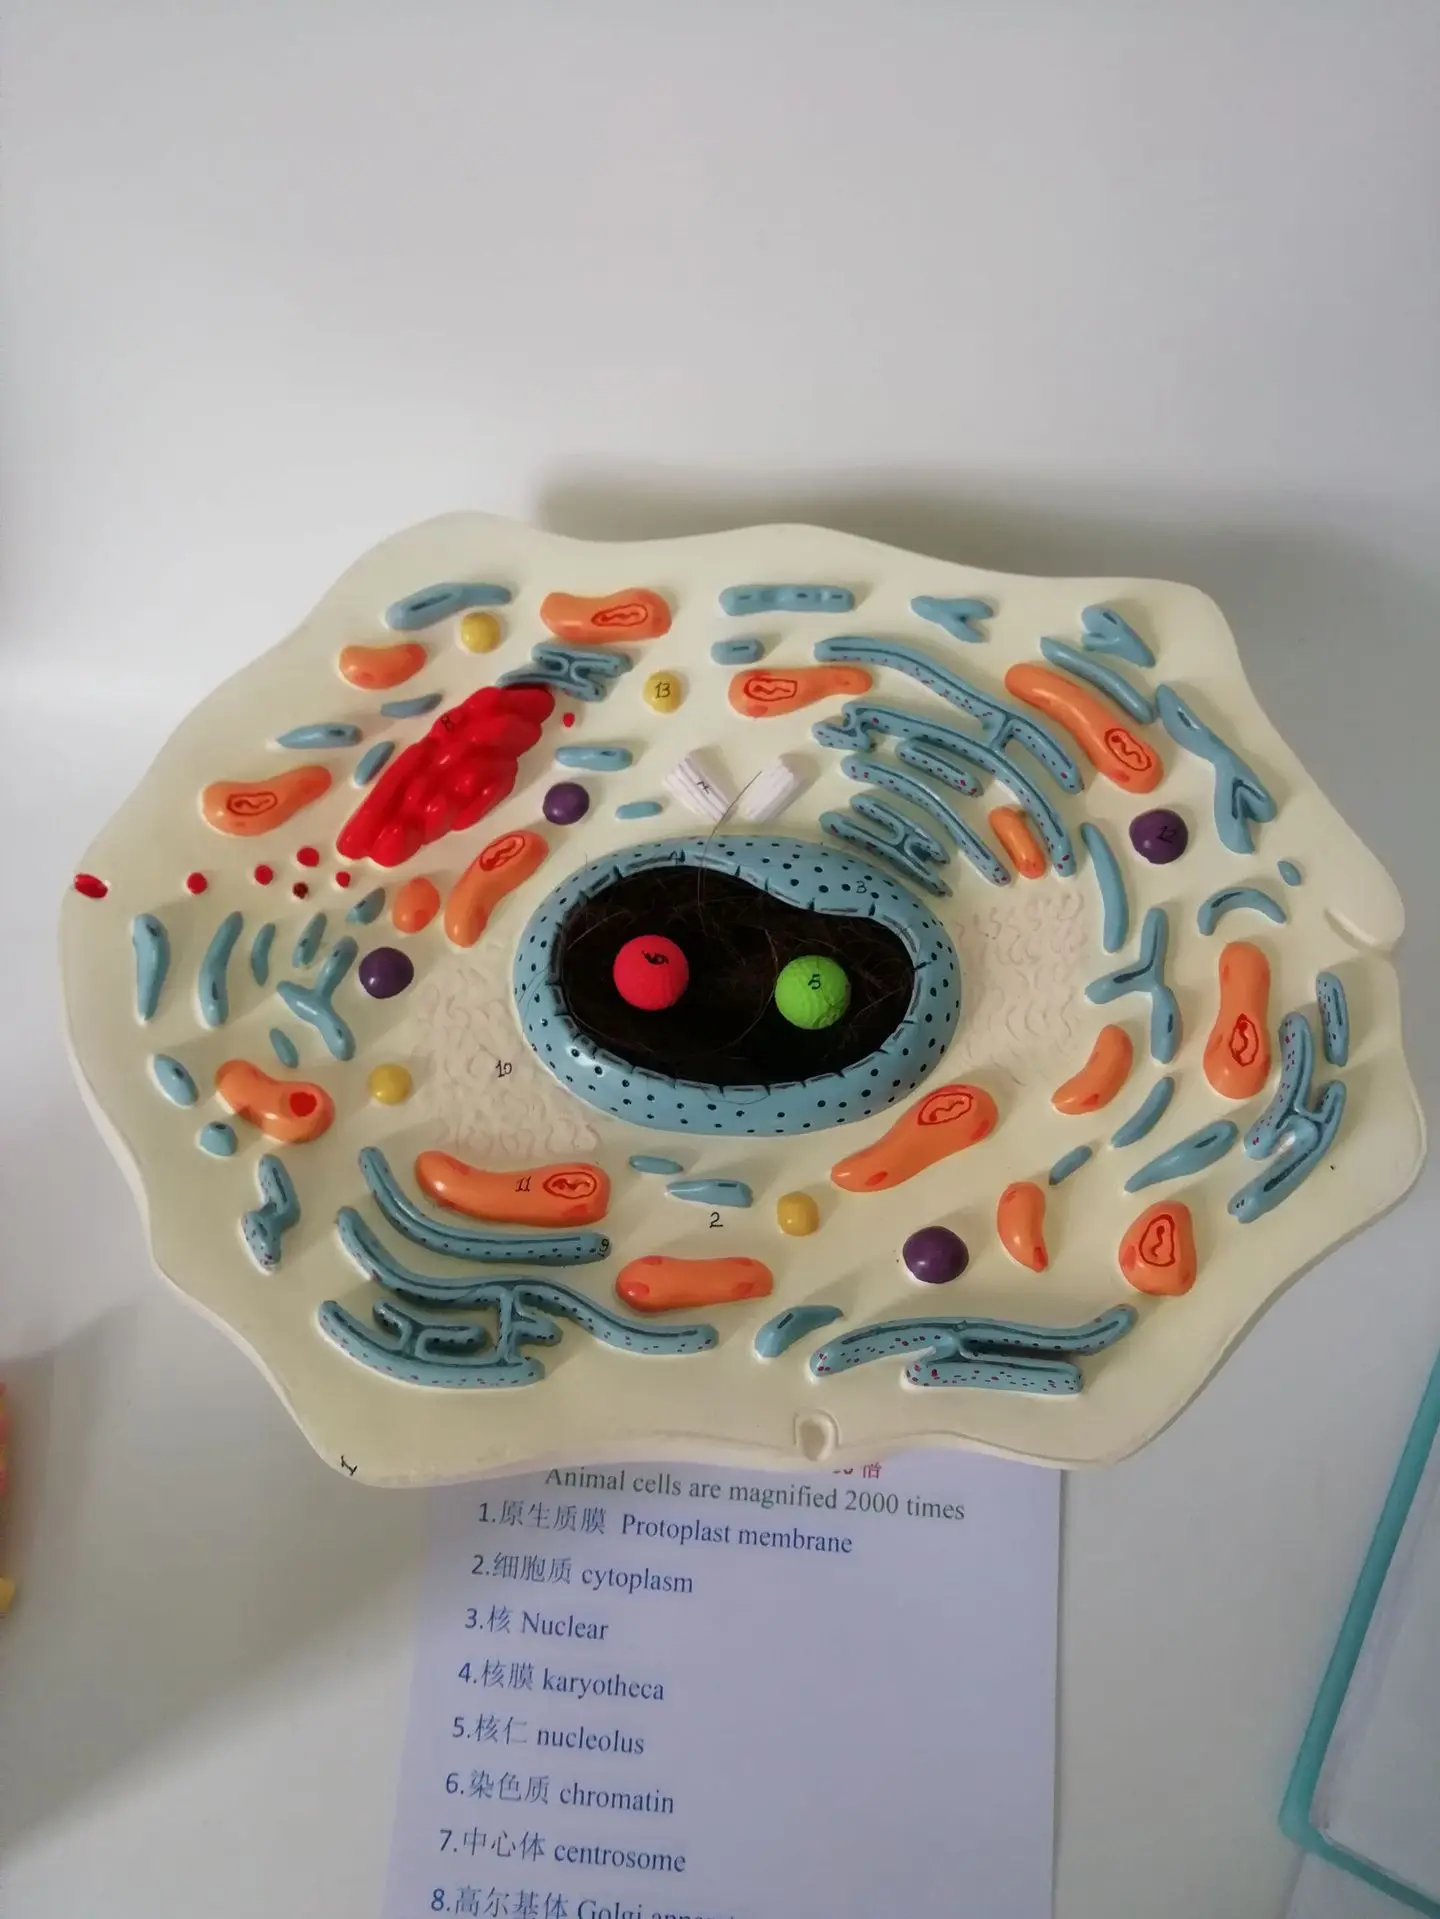 Animal cell submicroscopic structure model hospital biology school teaching aids student learning demonstration model